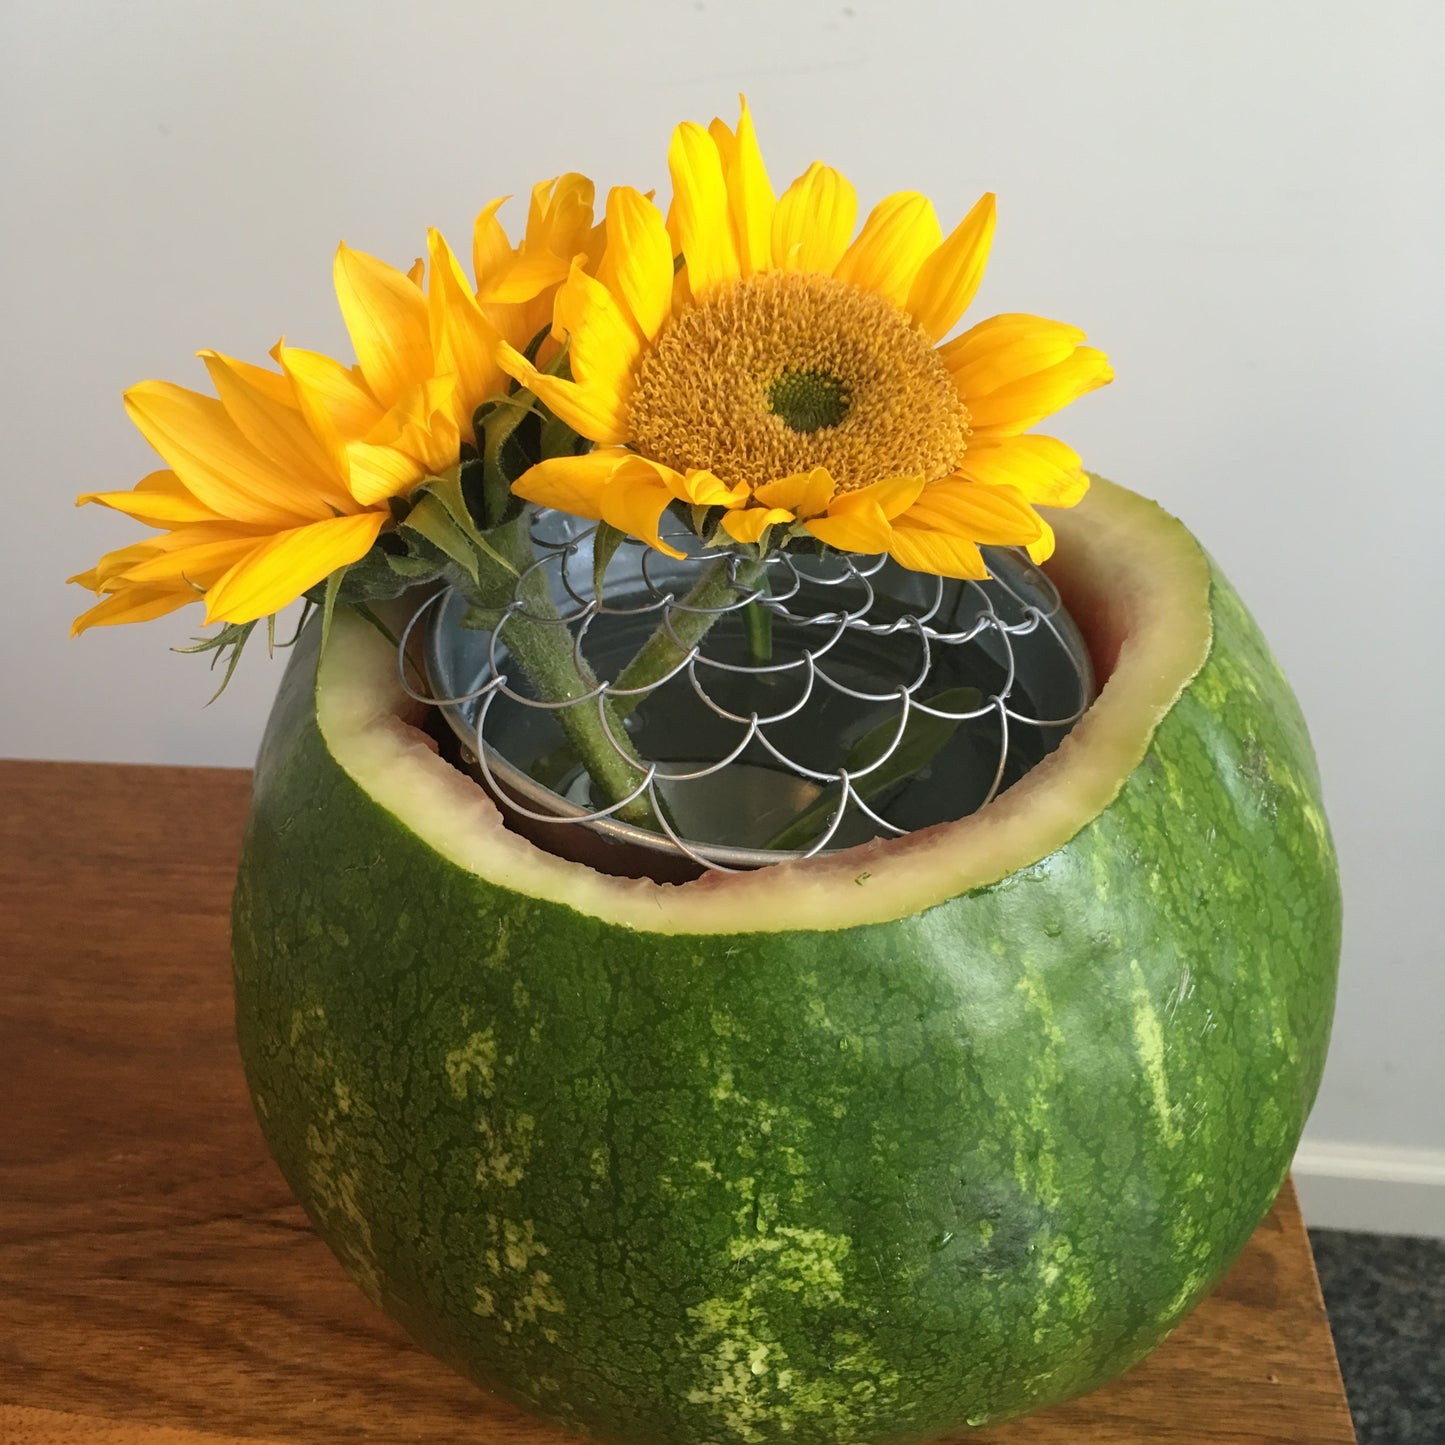 Showing how to use the 5 inch Easy Arranger to create a watermelon vase.